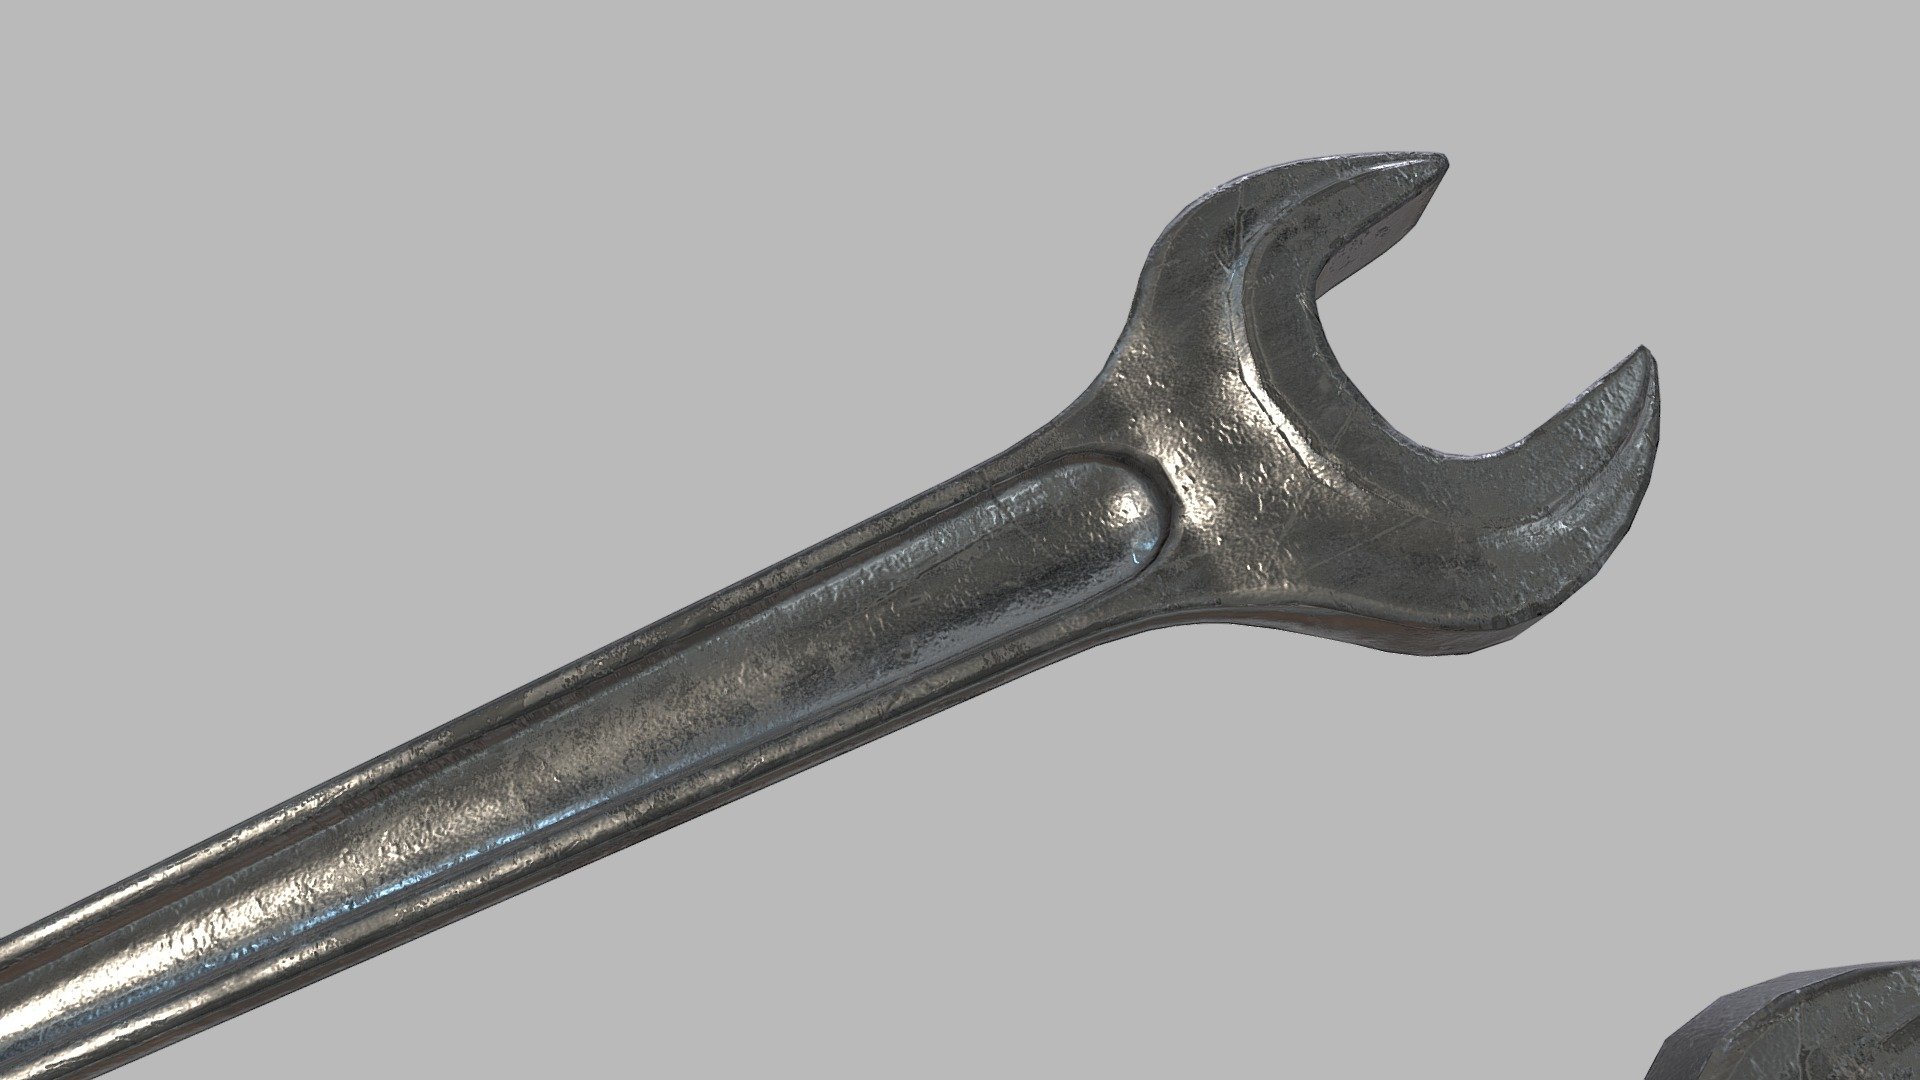 Single Open End Spanner Wrench PBR Game Ready low-poly 3d model ready for Virtual Reality (VR), Augmented Reality (AR), games and other real-time apps.

Ideal for realism art, good to use during fights, riots, survival, repair, crime etc.

This model has 2 LODs for versatility.

LOD0 triangles: 3156
LOD1 triangles: 440
LOD 0 is subdividable for higher polycount.

Texture maps:
- 1 Albedo (filename_BC)
- 1Normal (filename_N)
- 1 Metallic (filename_M)
- 1 Roughness (filename_R)
- 1 Ambient Occussion (filename_AO) - Single Open Ended Spanner Wrench PBR Game Ready - Buy Royalty Free 3D model by artssionate 3d model